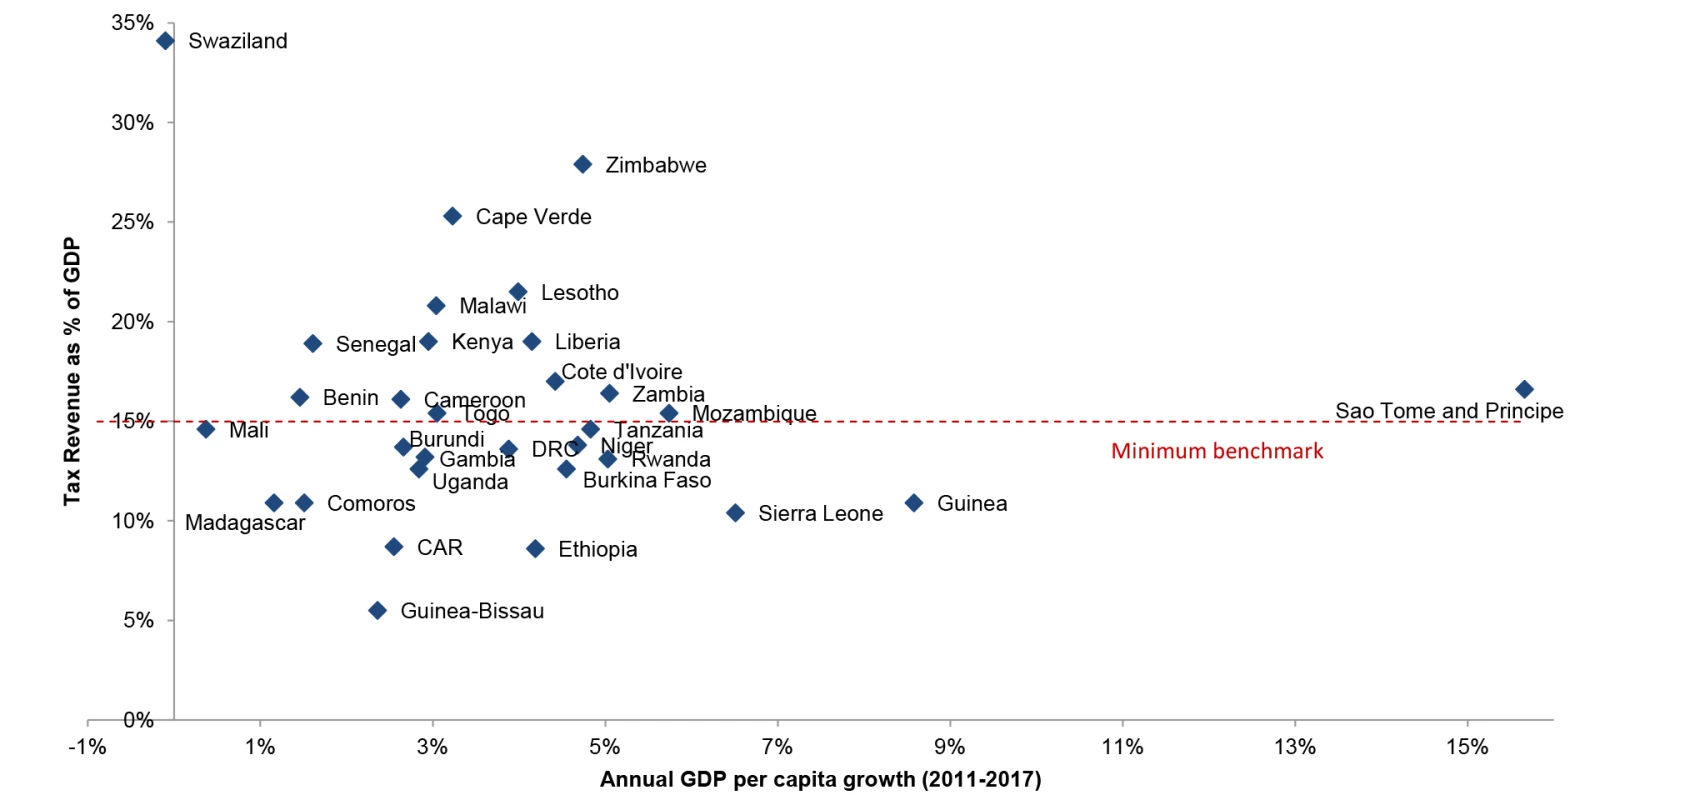 Growth and taxation rates in low- and lower middle-income countries.